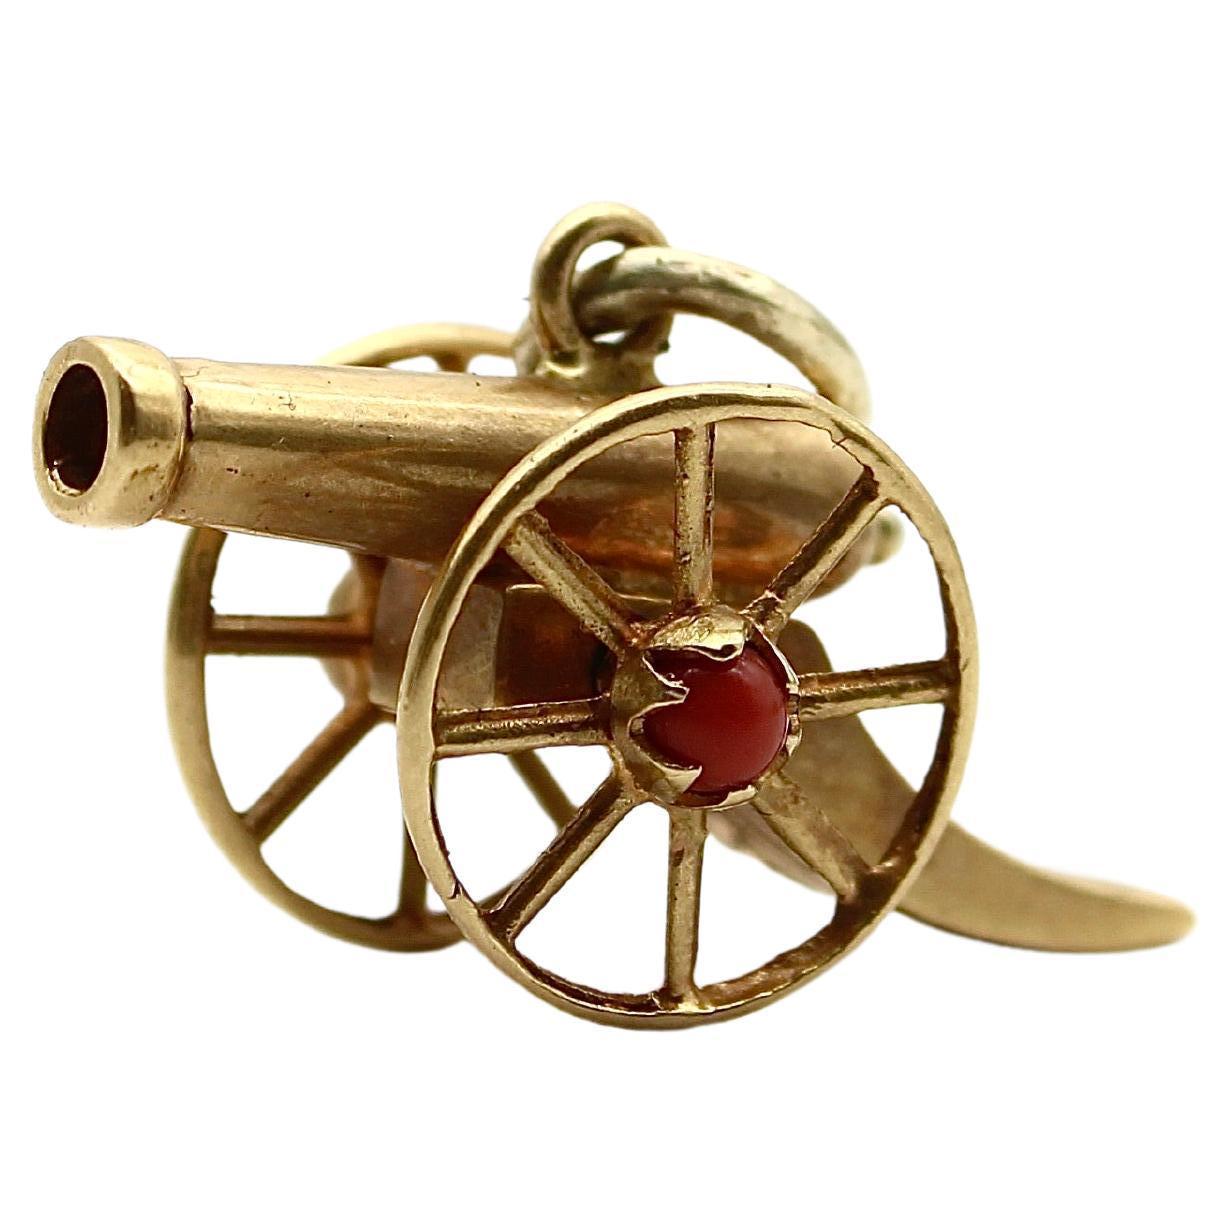 18K Gold Victorian Articulated Cannon Charm with Coral